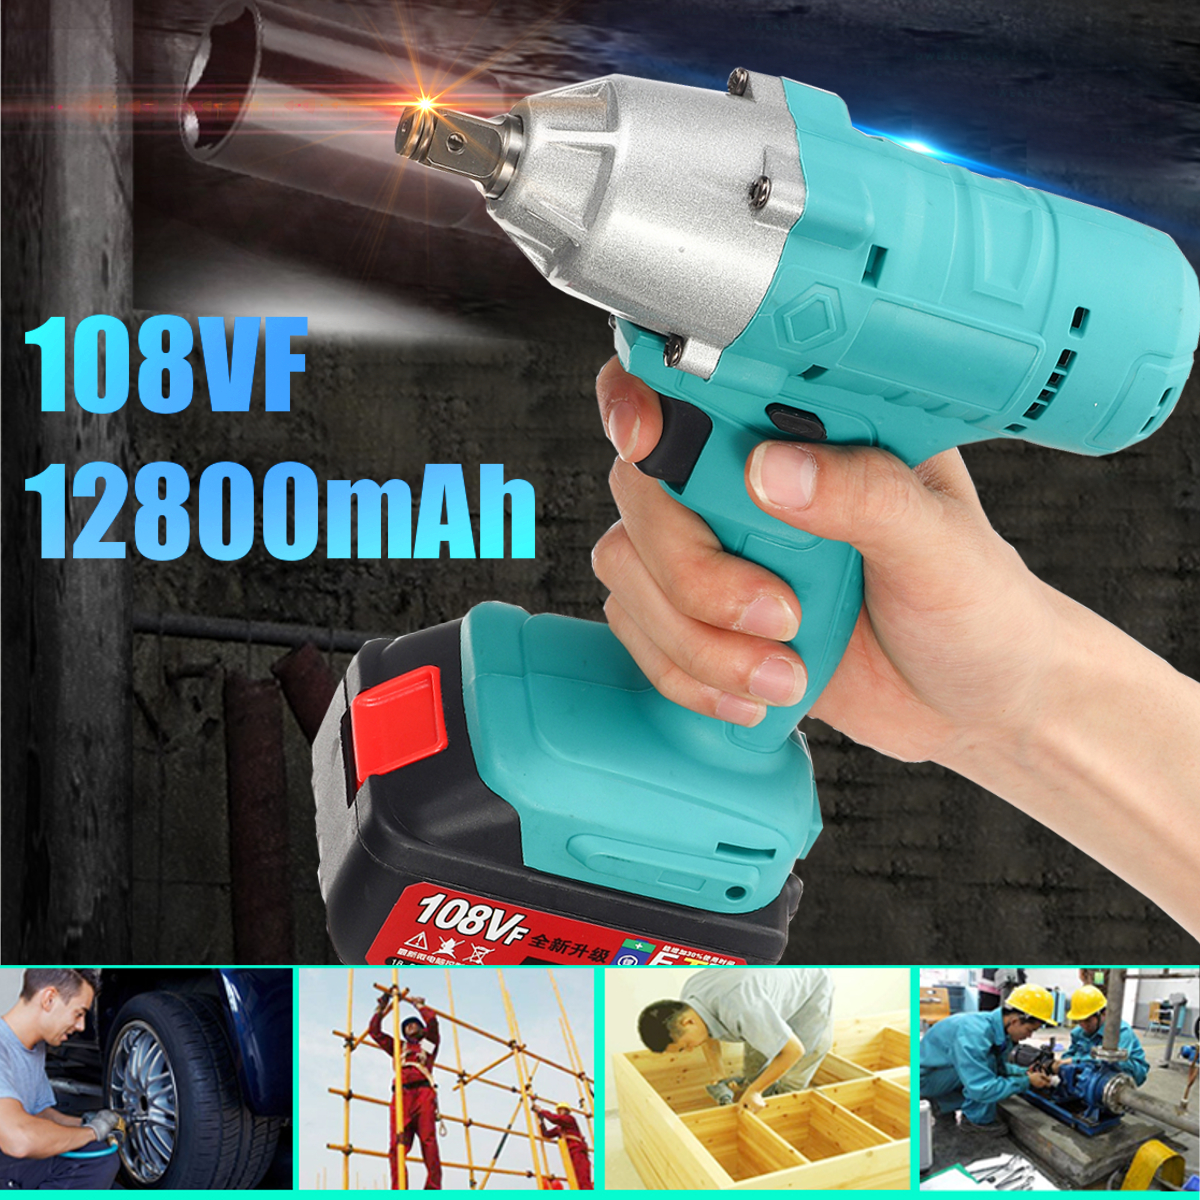 108VF-12800mAh-Lithium-Ion-Battery-Electric-Cordless-Impact-Wrench-Drill-Driver-Kit-1466581-1